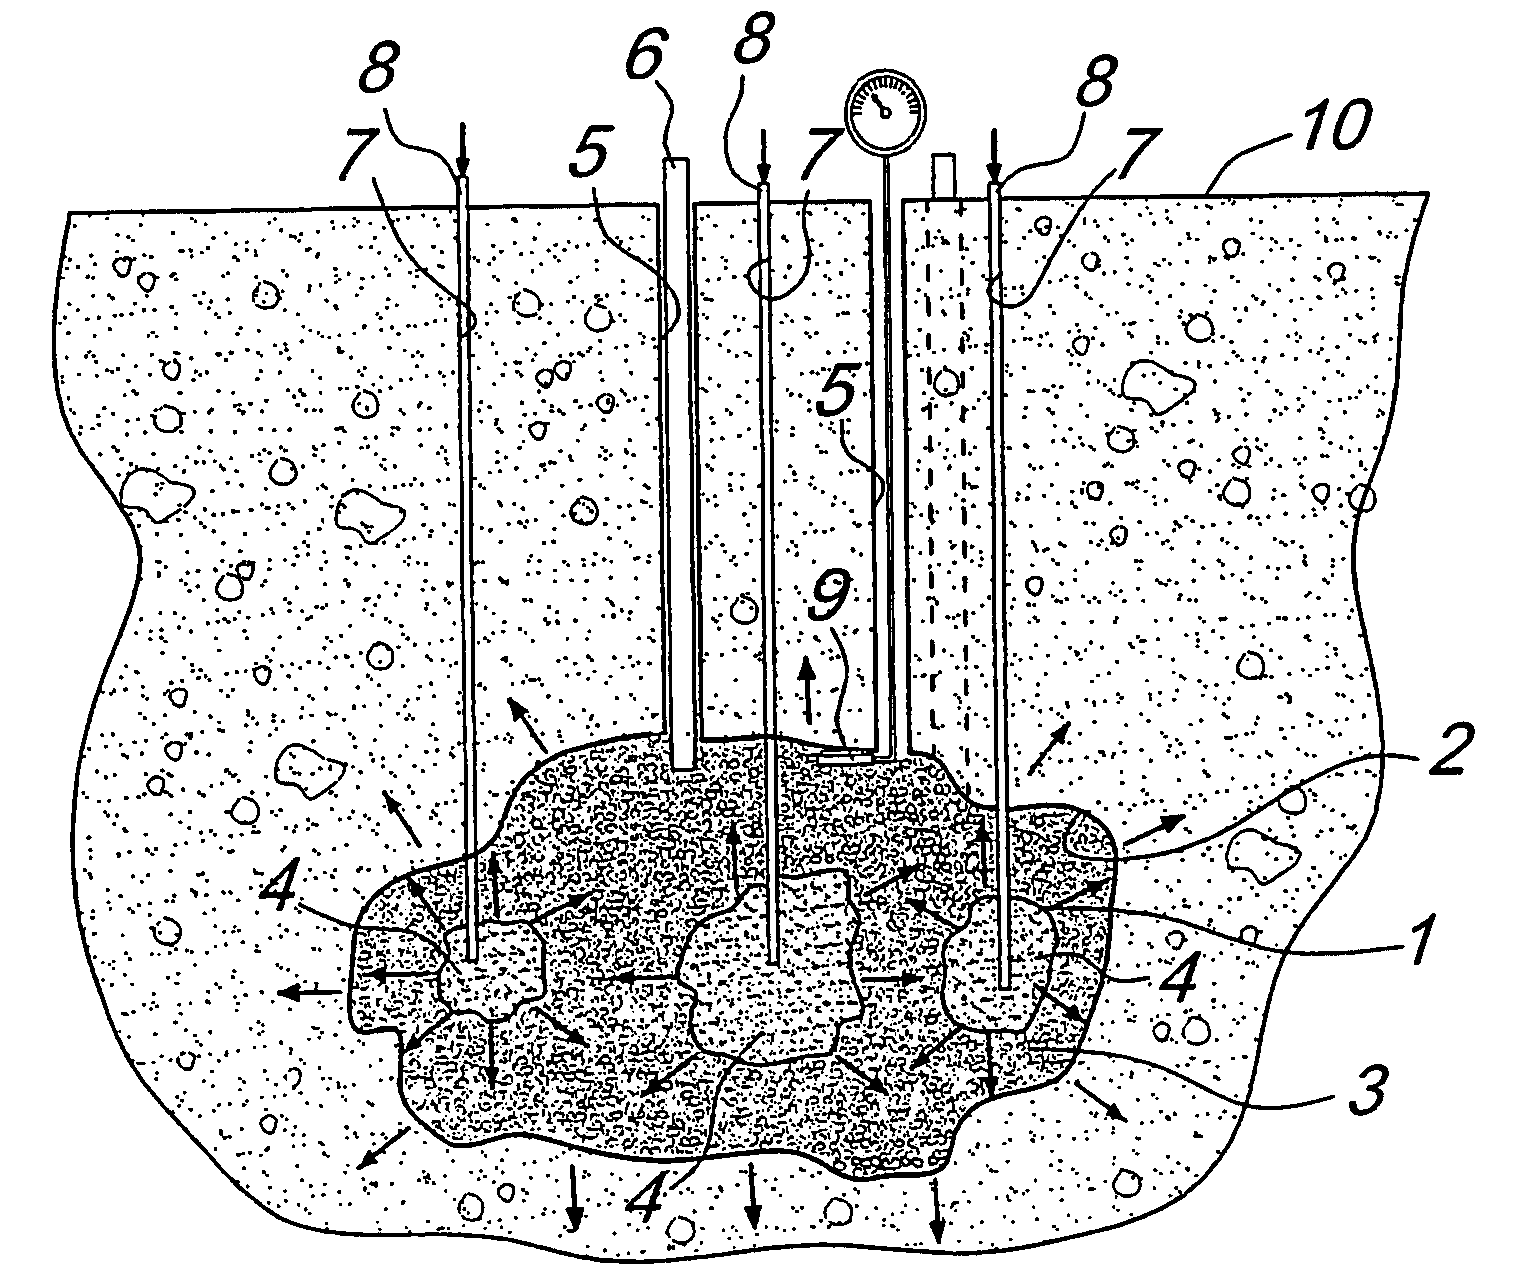 Method For Saturating Cavities Present in a Mass of Soil or In a Body in General